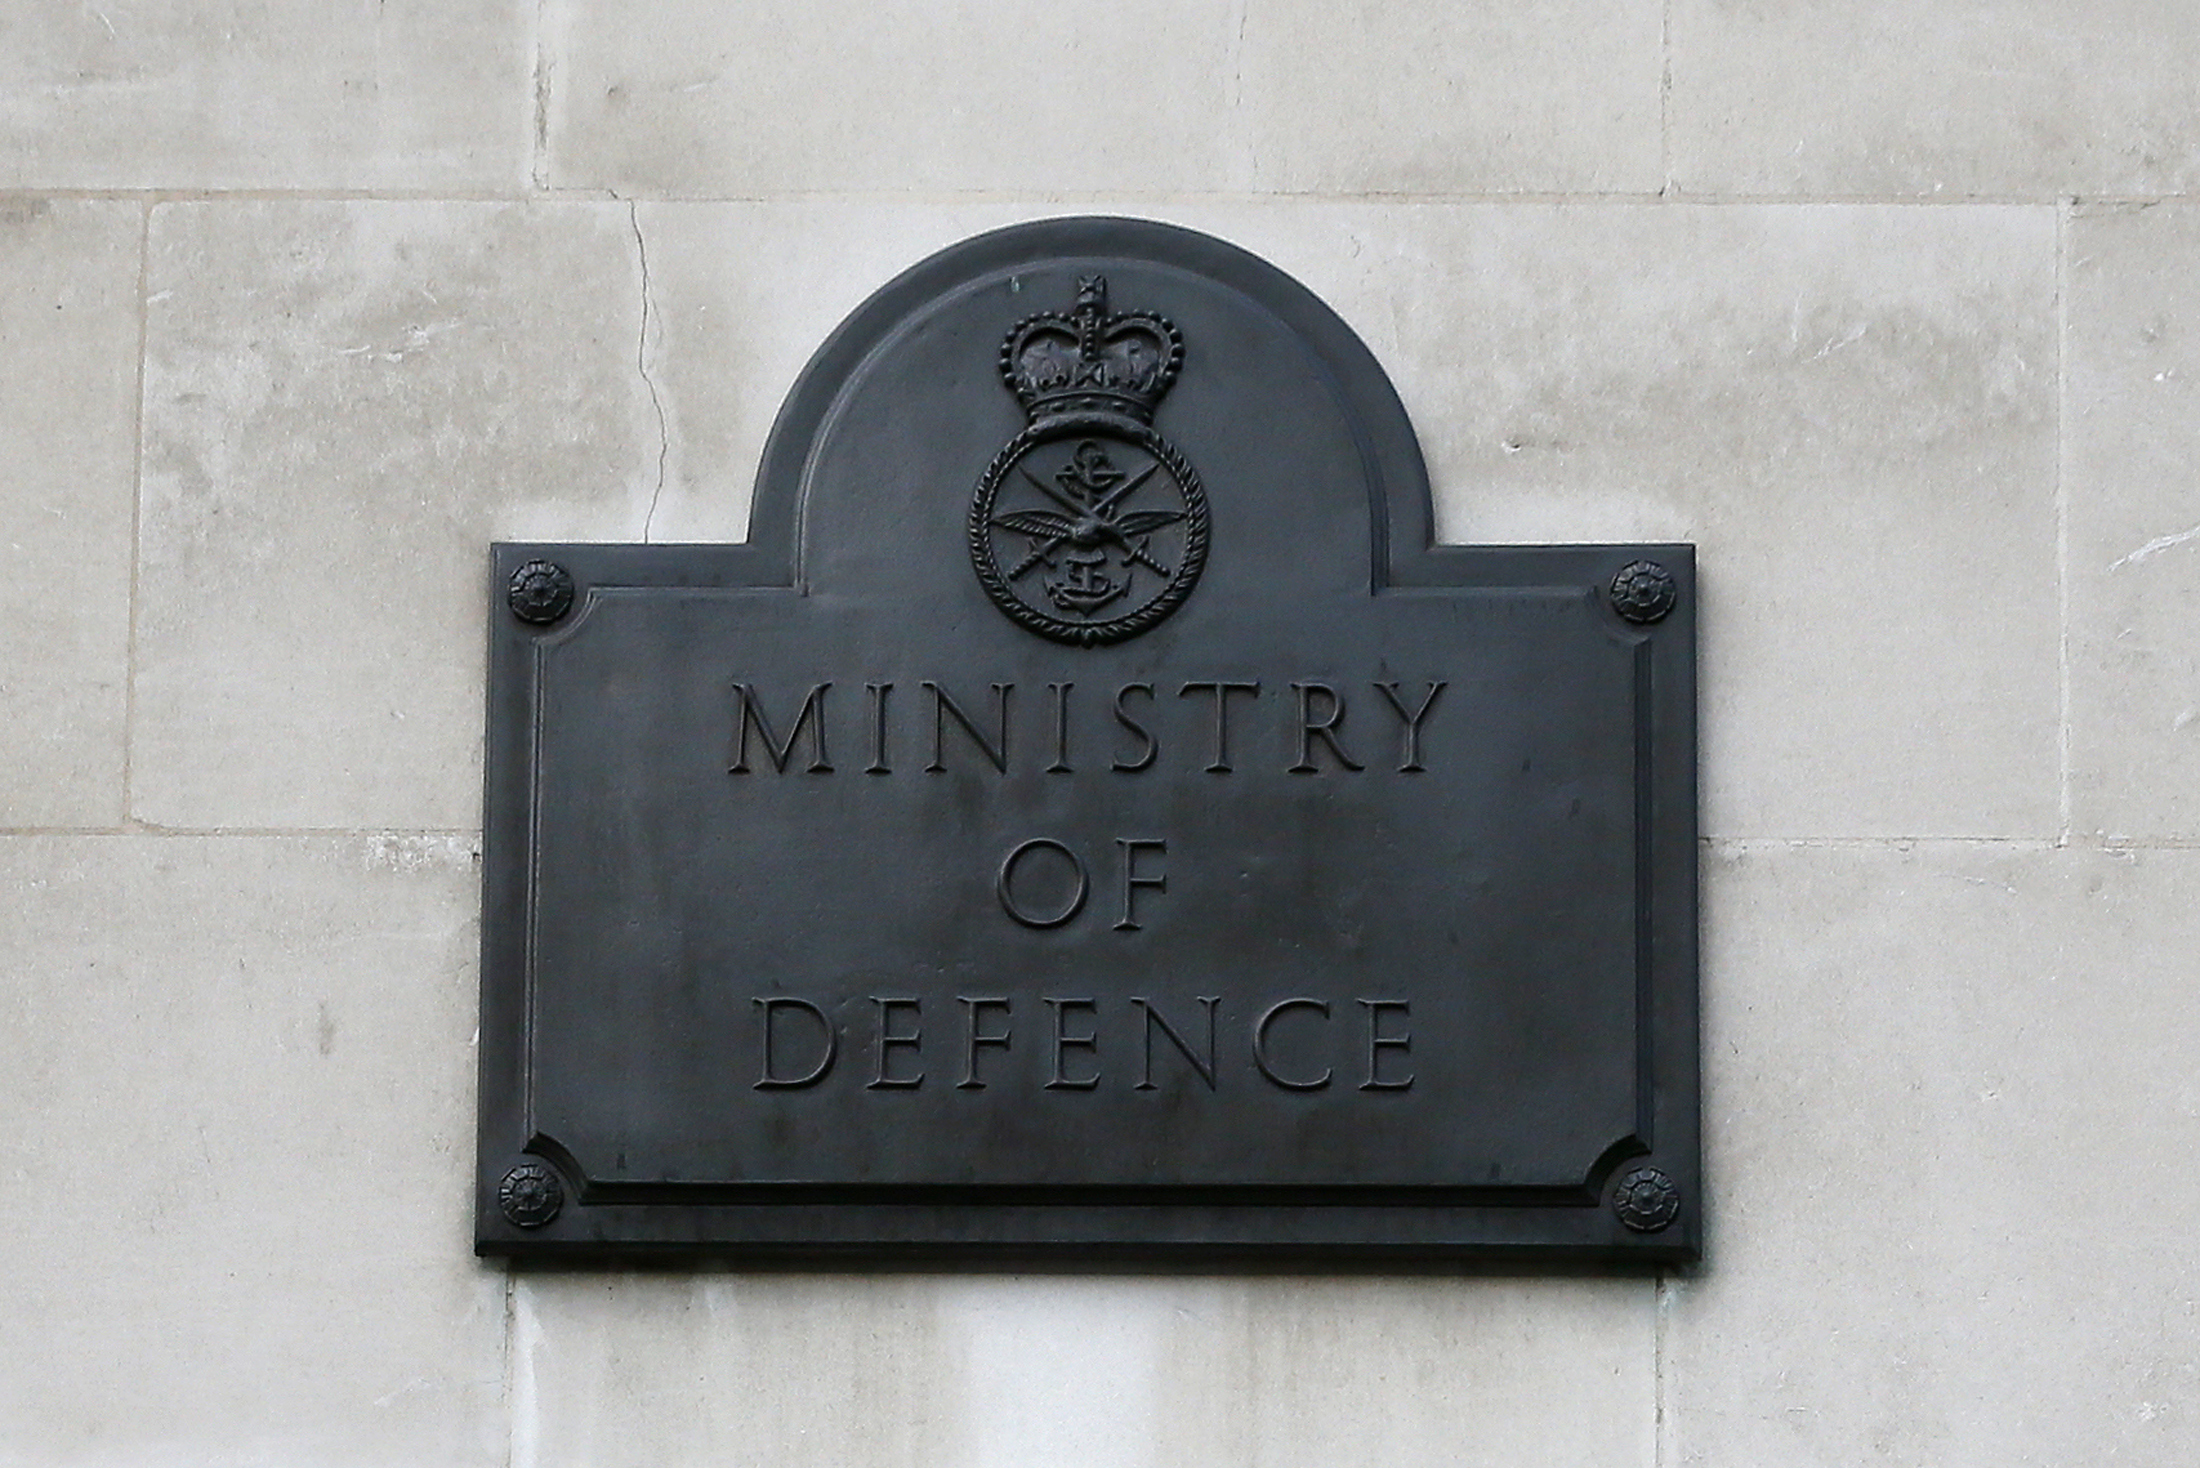 A sign hangs outside the Ministry of Defence building in London